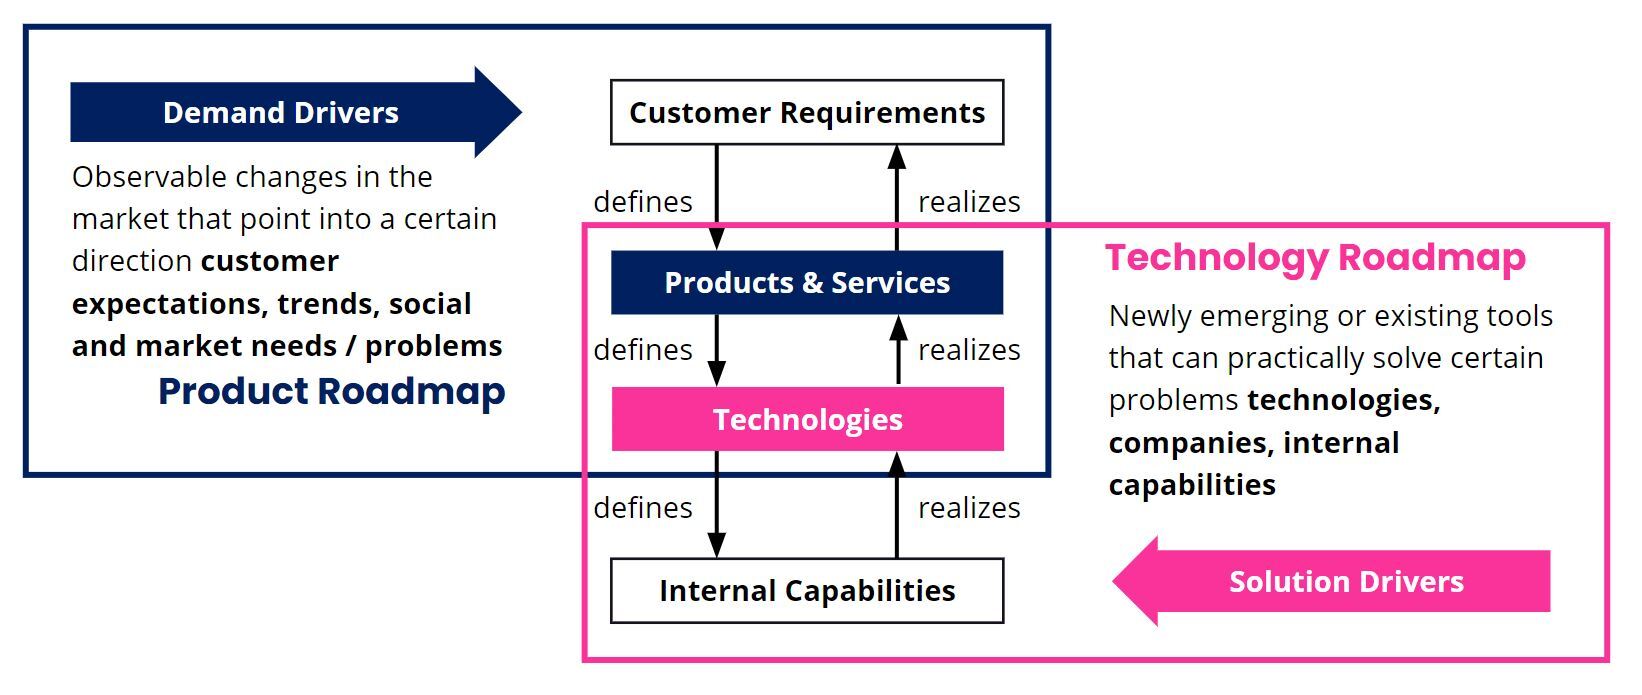 Demand and Solution Drivers for Innovation